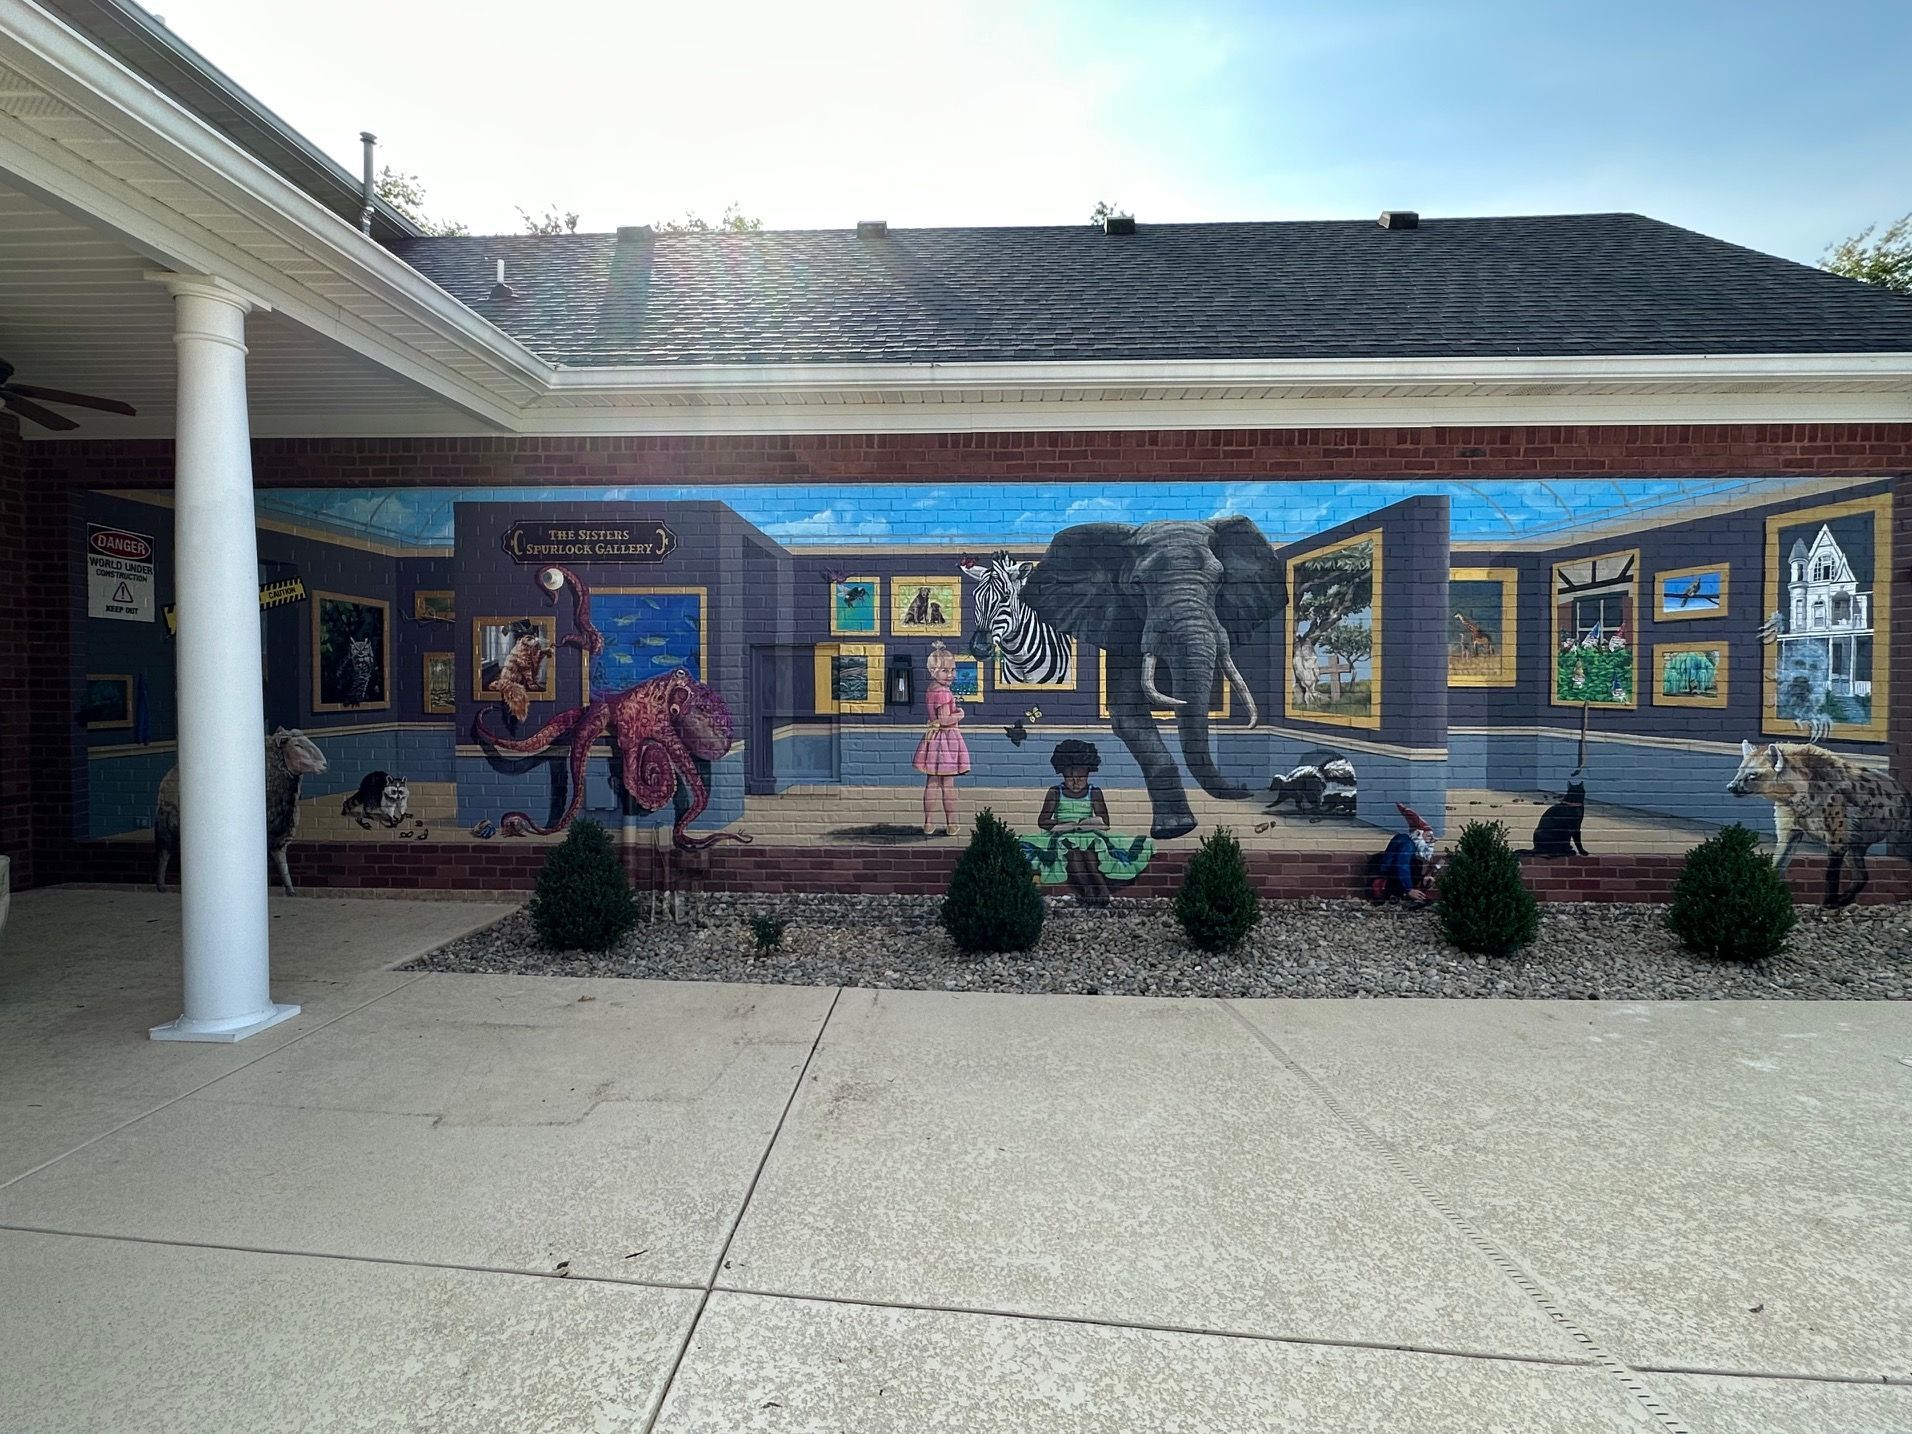 After Painting Characters in Her Books Painted on This Exterior Brick Wall - Exterior and Residential Mural Art